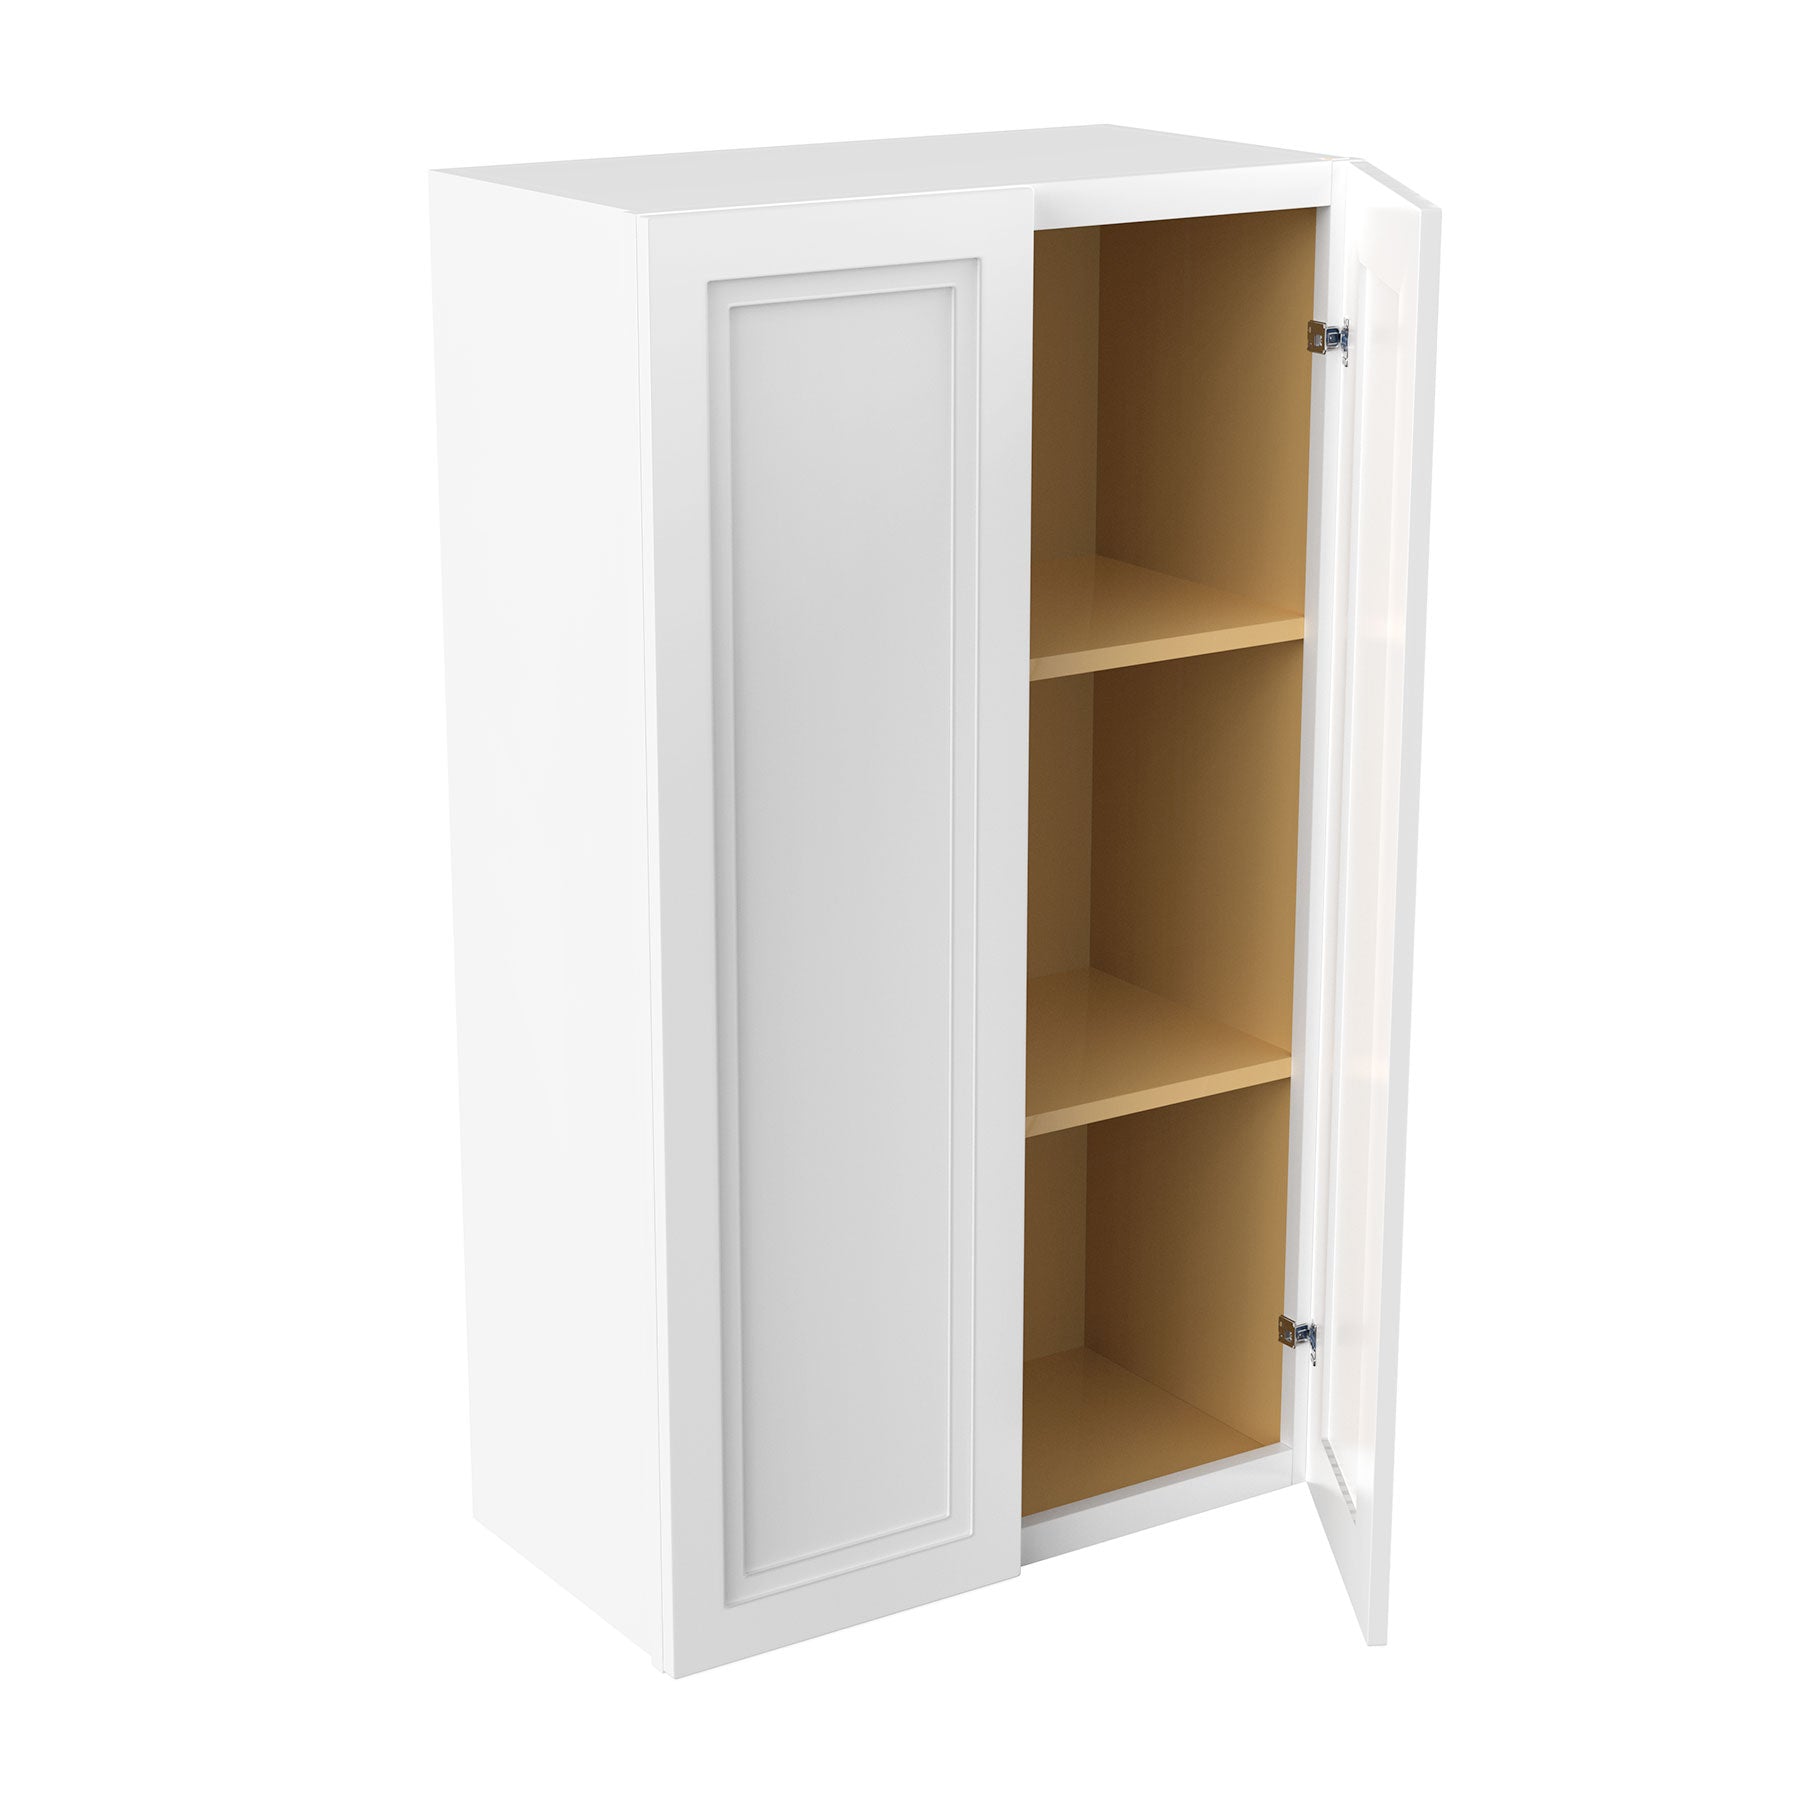 RTA - Fashion White - 42" High Double Door Wall Cabinet | 24"W x 42"H x 12"D